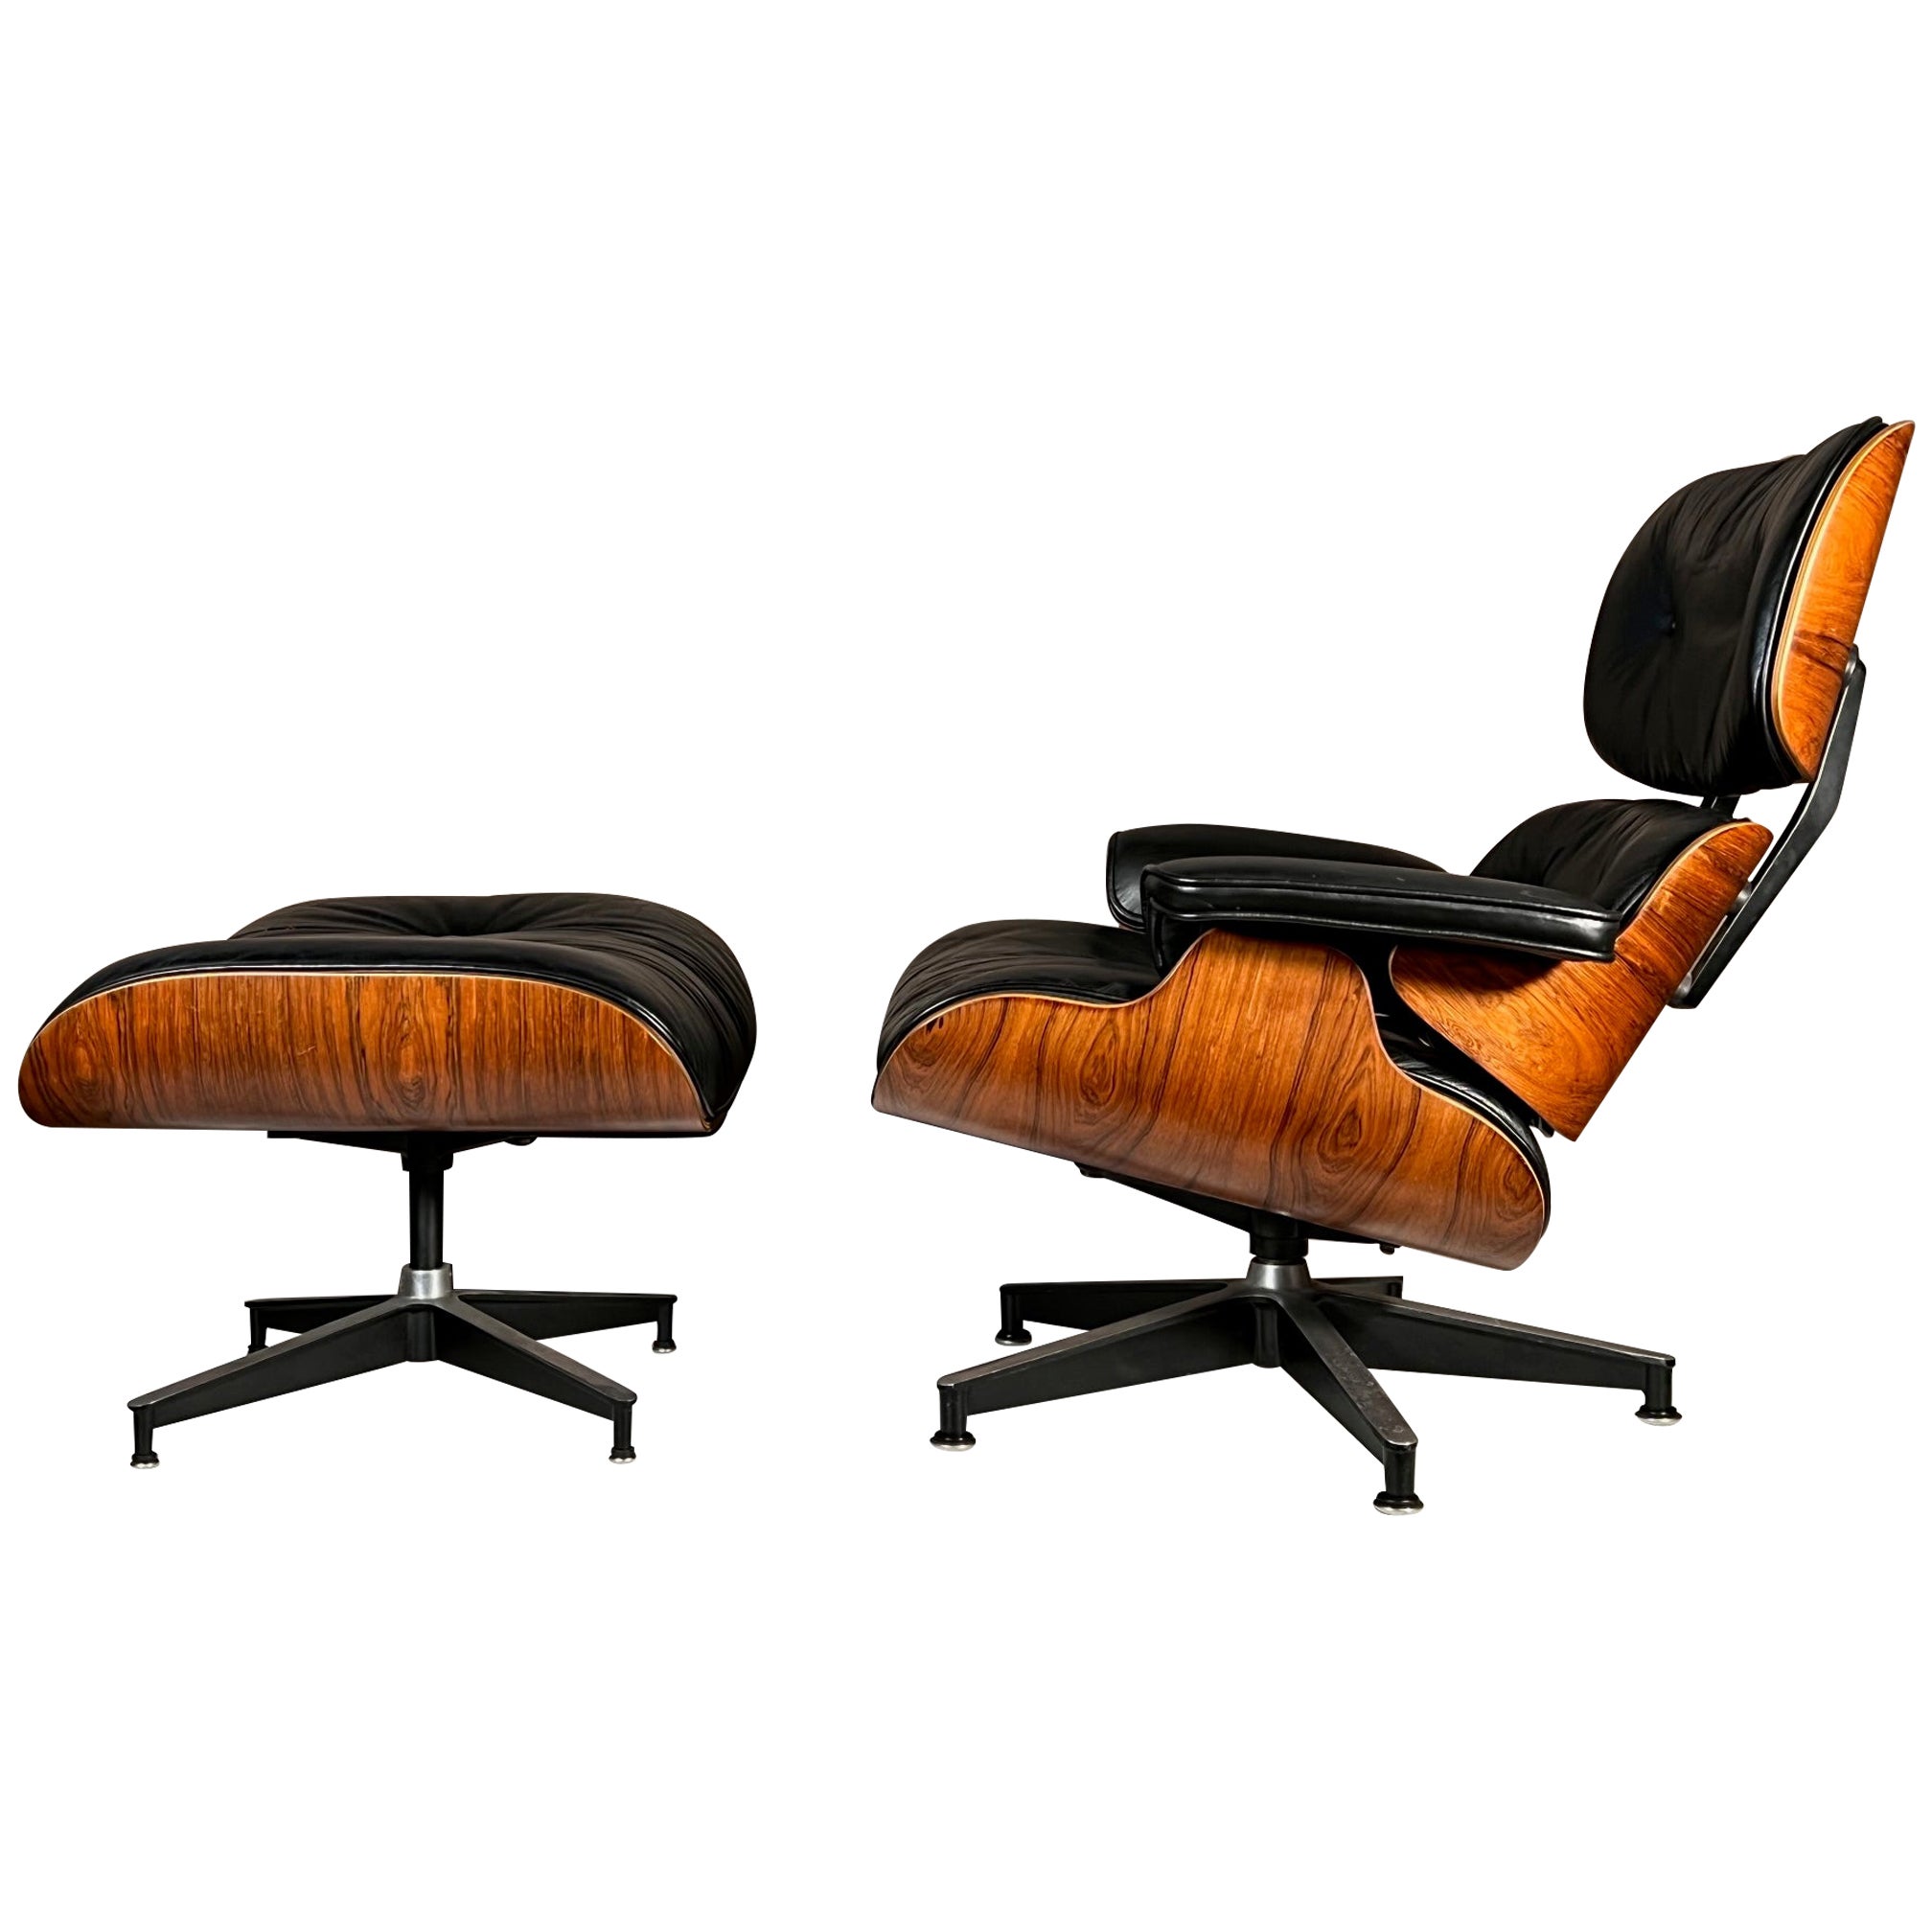 Charles Eames Herman Miller Lounge Chair and Ottoman, 1976